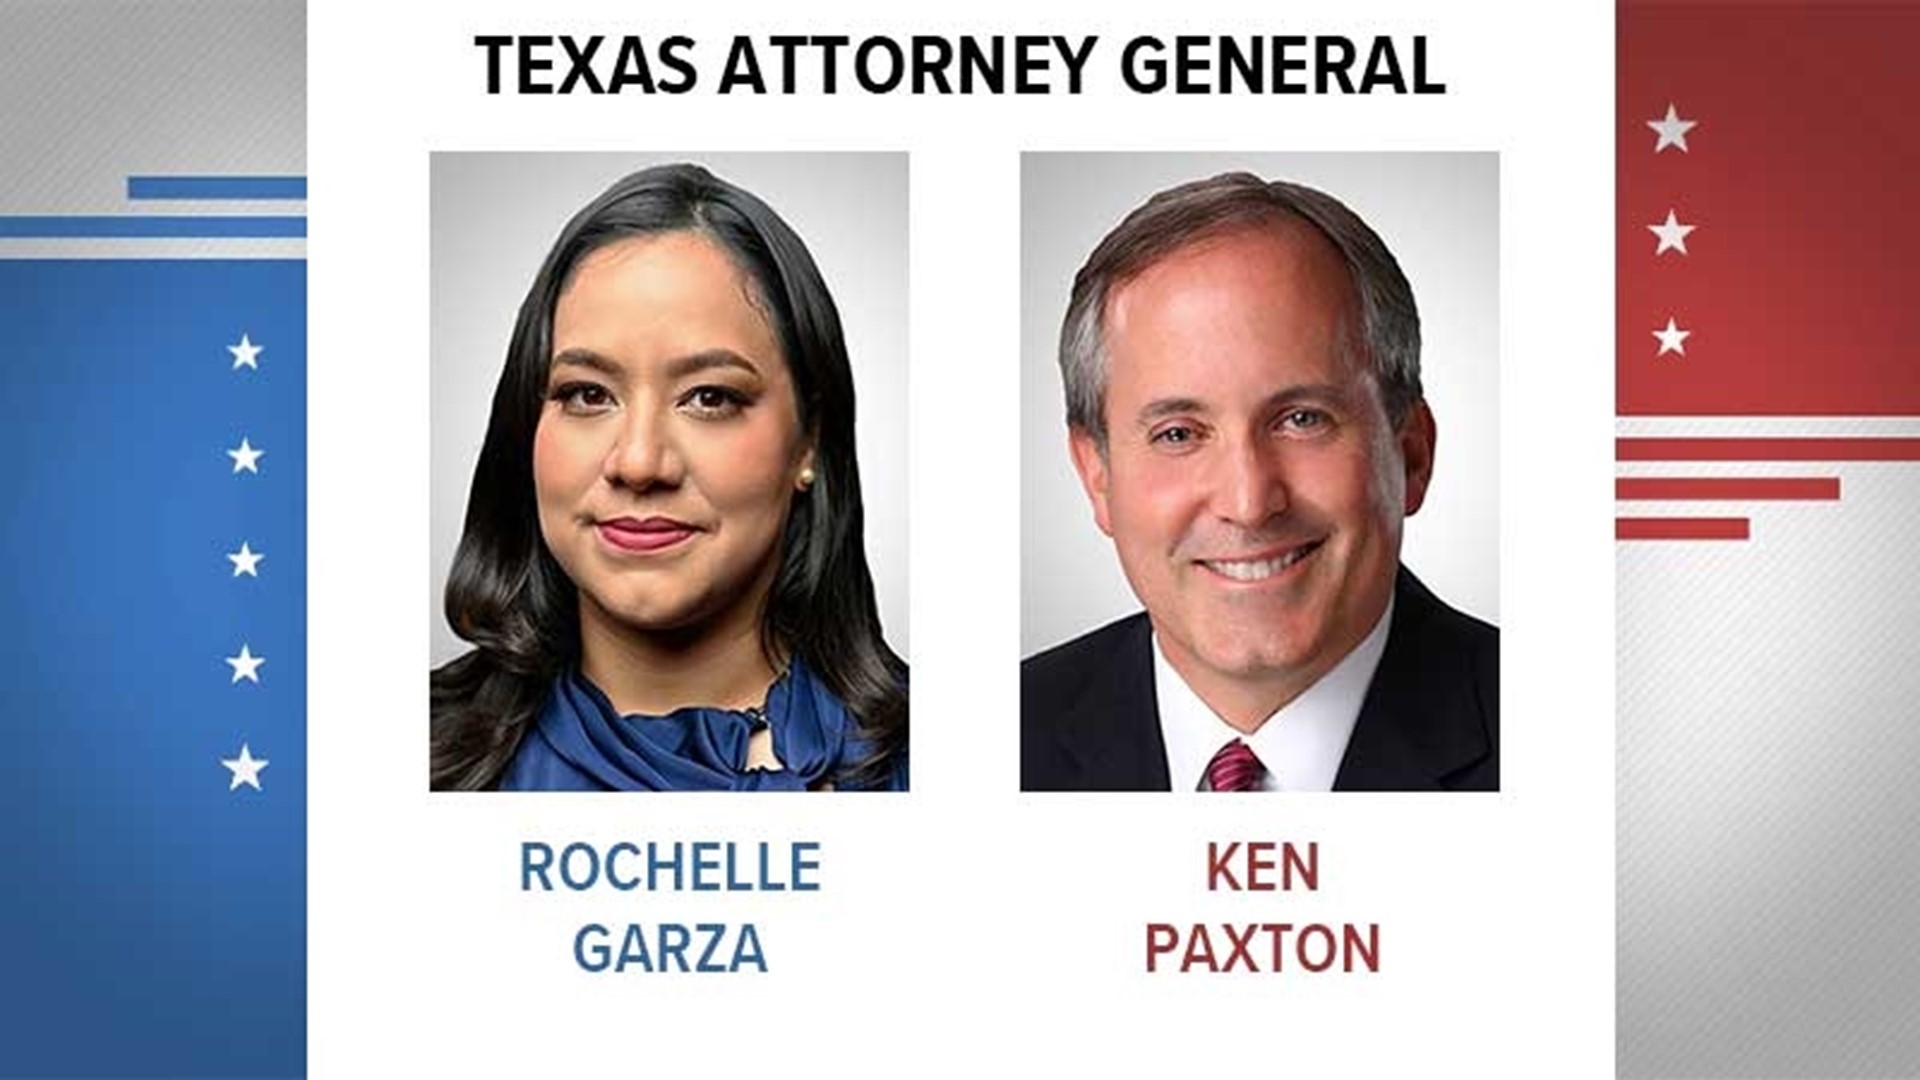 Political newcomer Rochelle Garza was hoping to knock two-term Ken Paxton out of position.